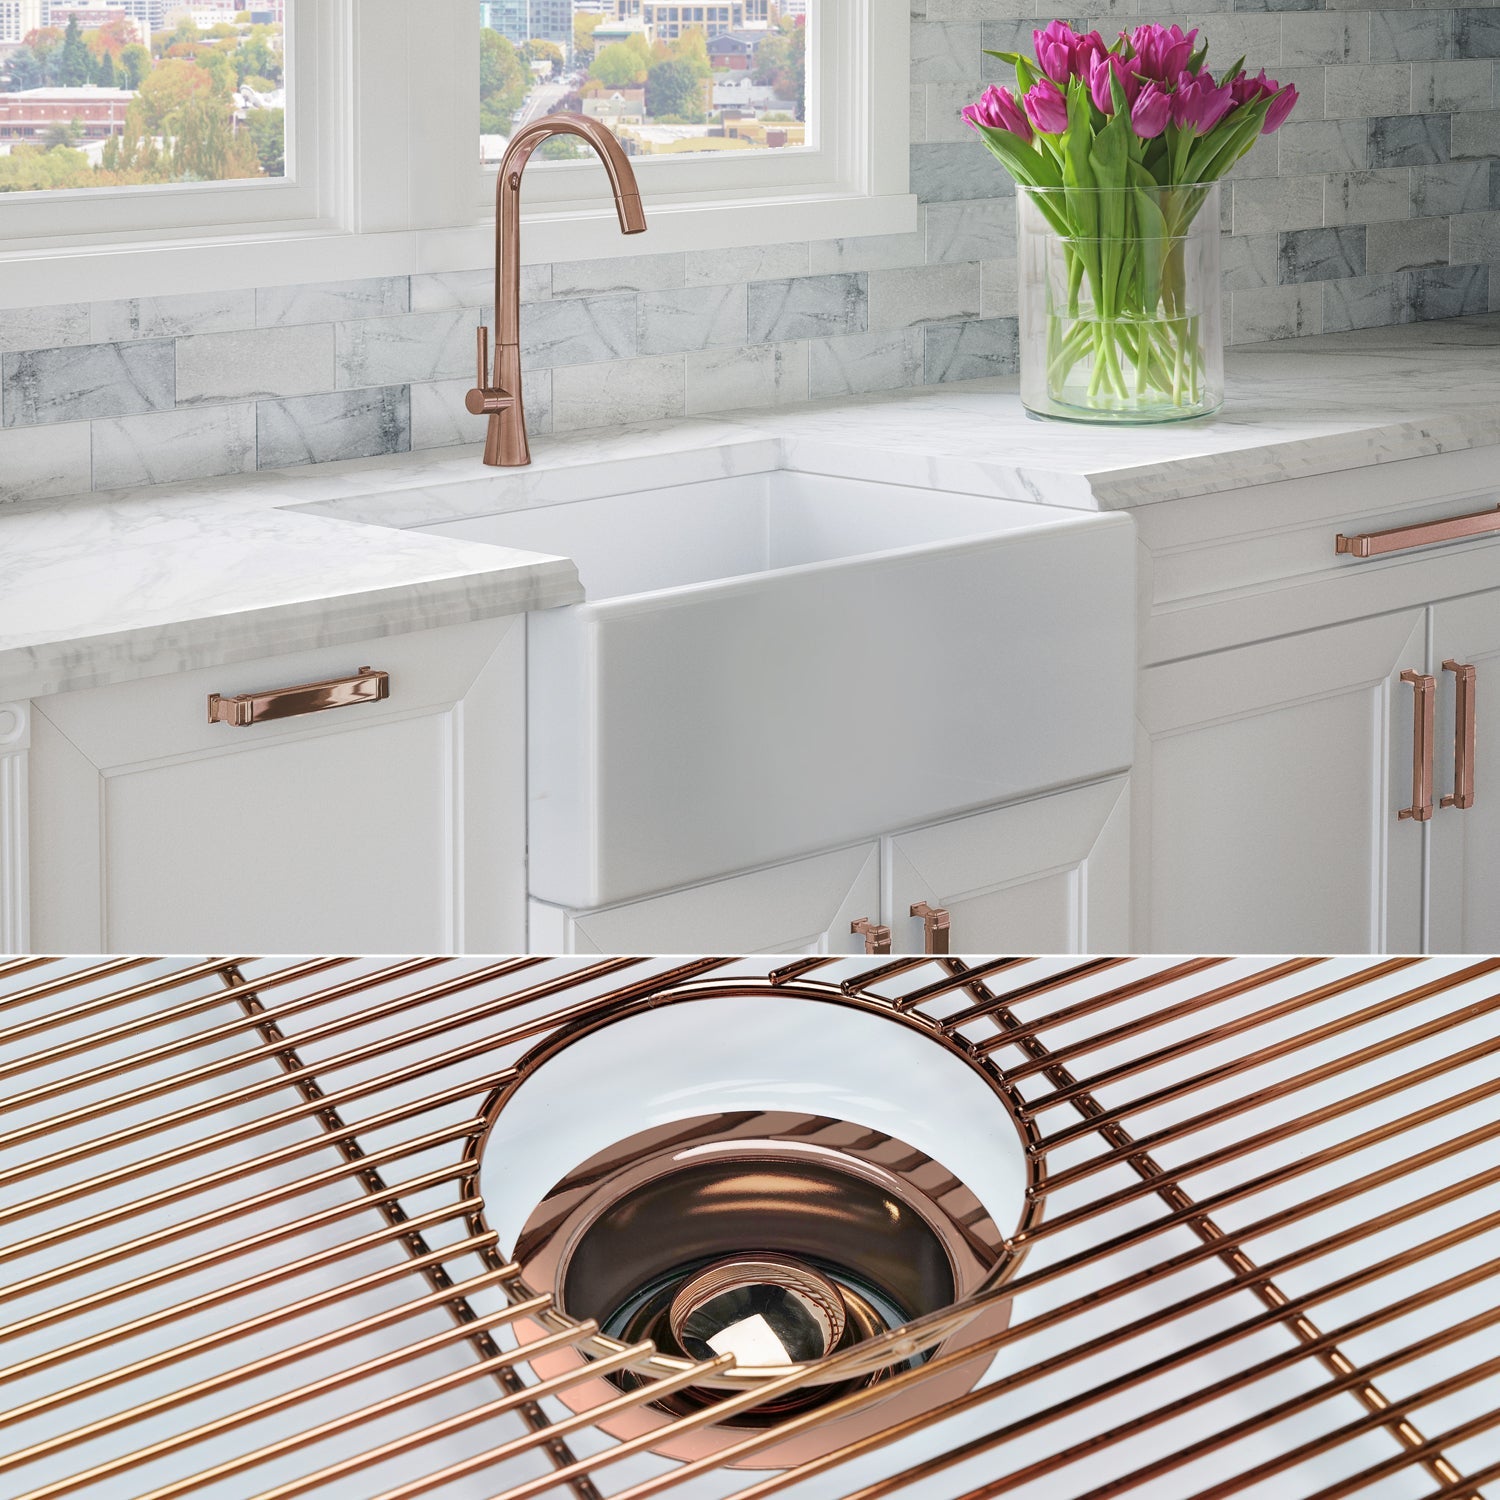 FSW1001RG LUXURY 30-INCH SOLID FIRECLAY FARMHOUSE SINK IN WHITE, POL. ROSE GOLD ACCS, FLAT FRONT